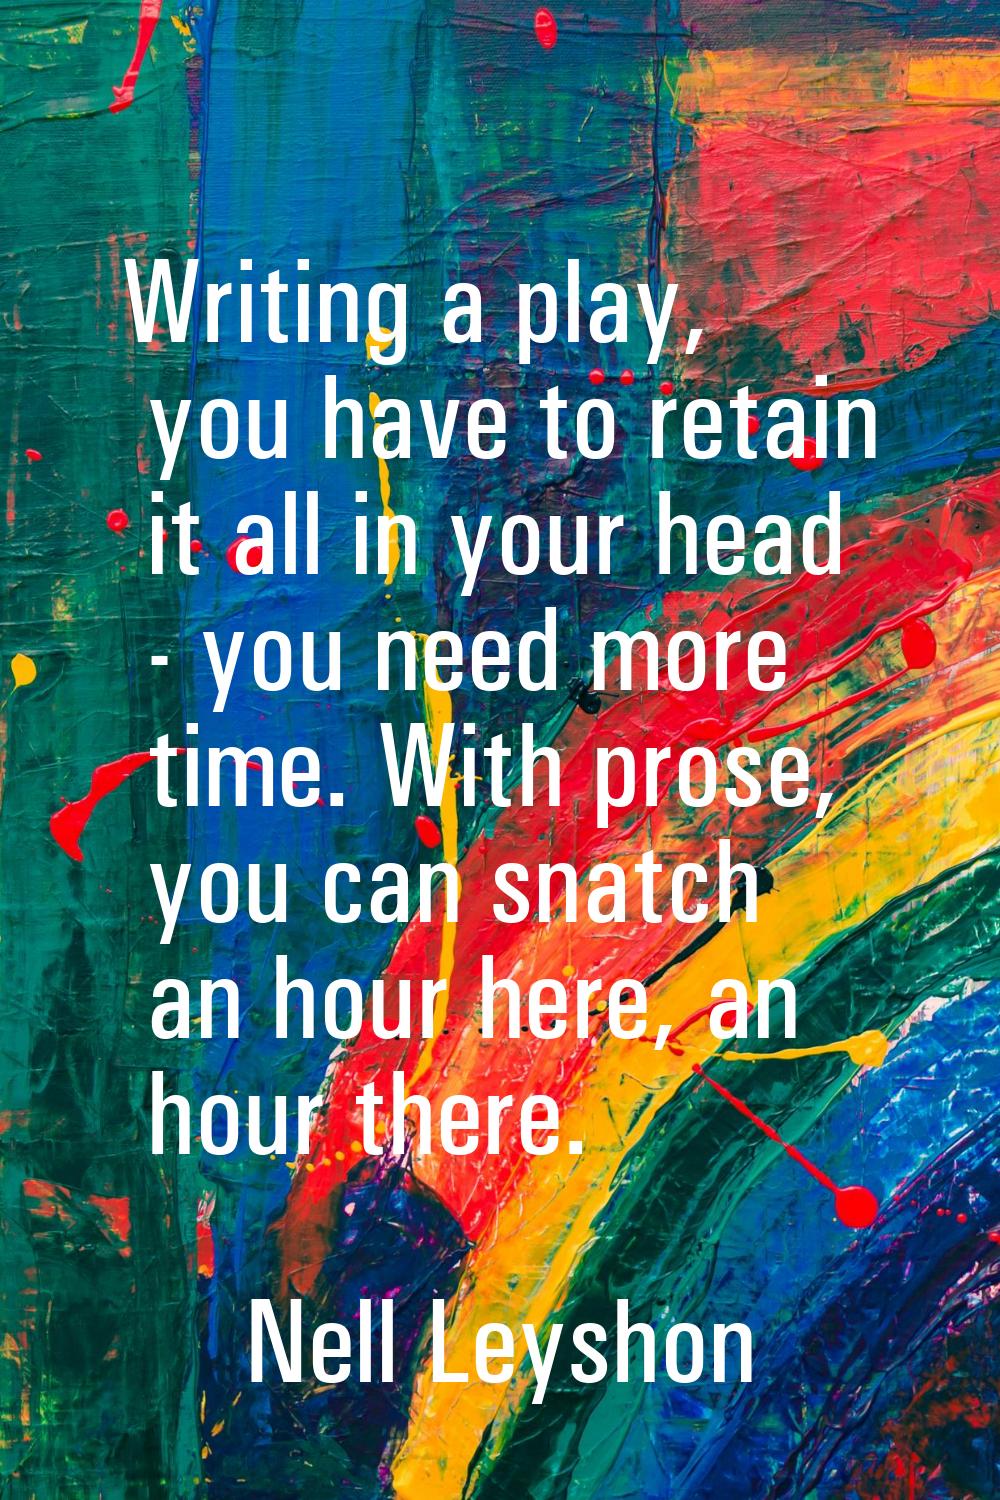 Writing a play, you have to retain it all in your head - you need more time. With prose, you can sn